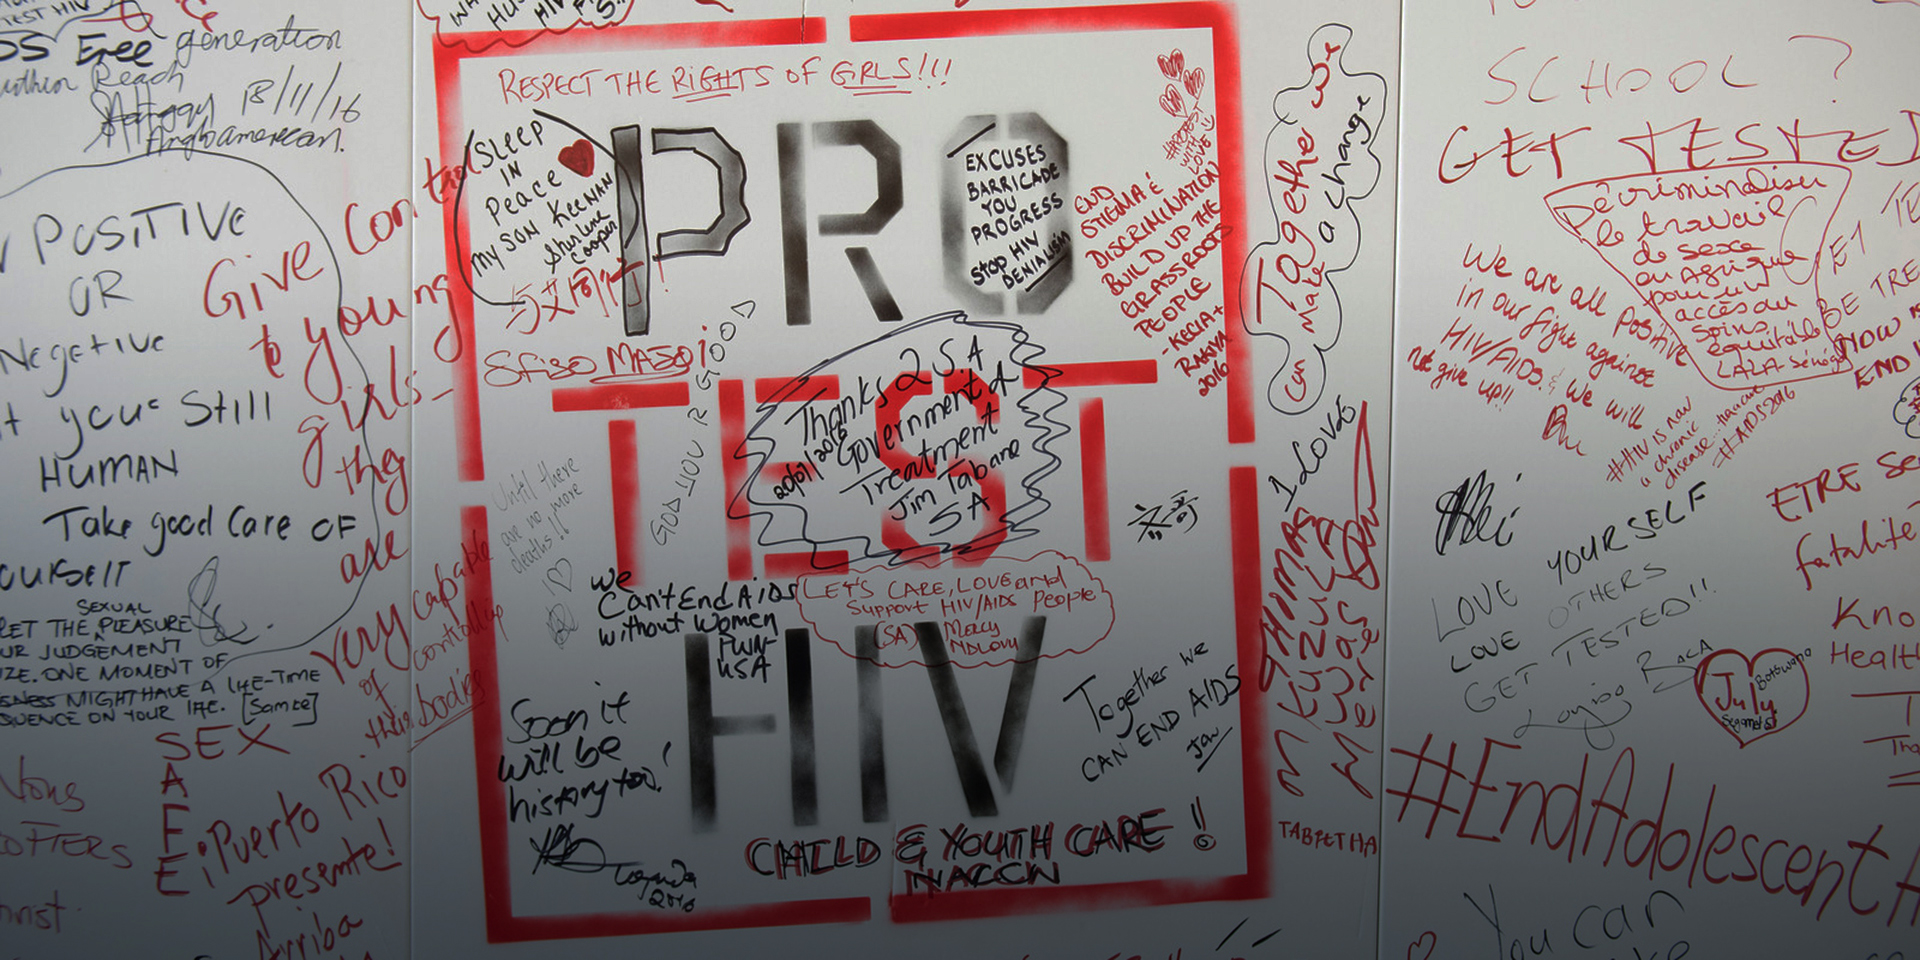 A white board covered in written messages including 